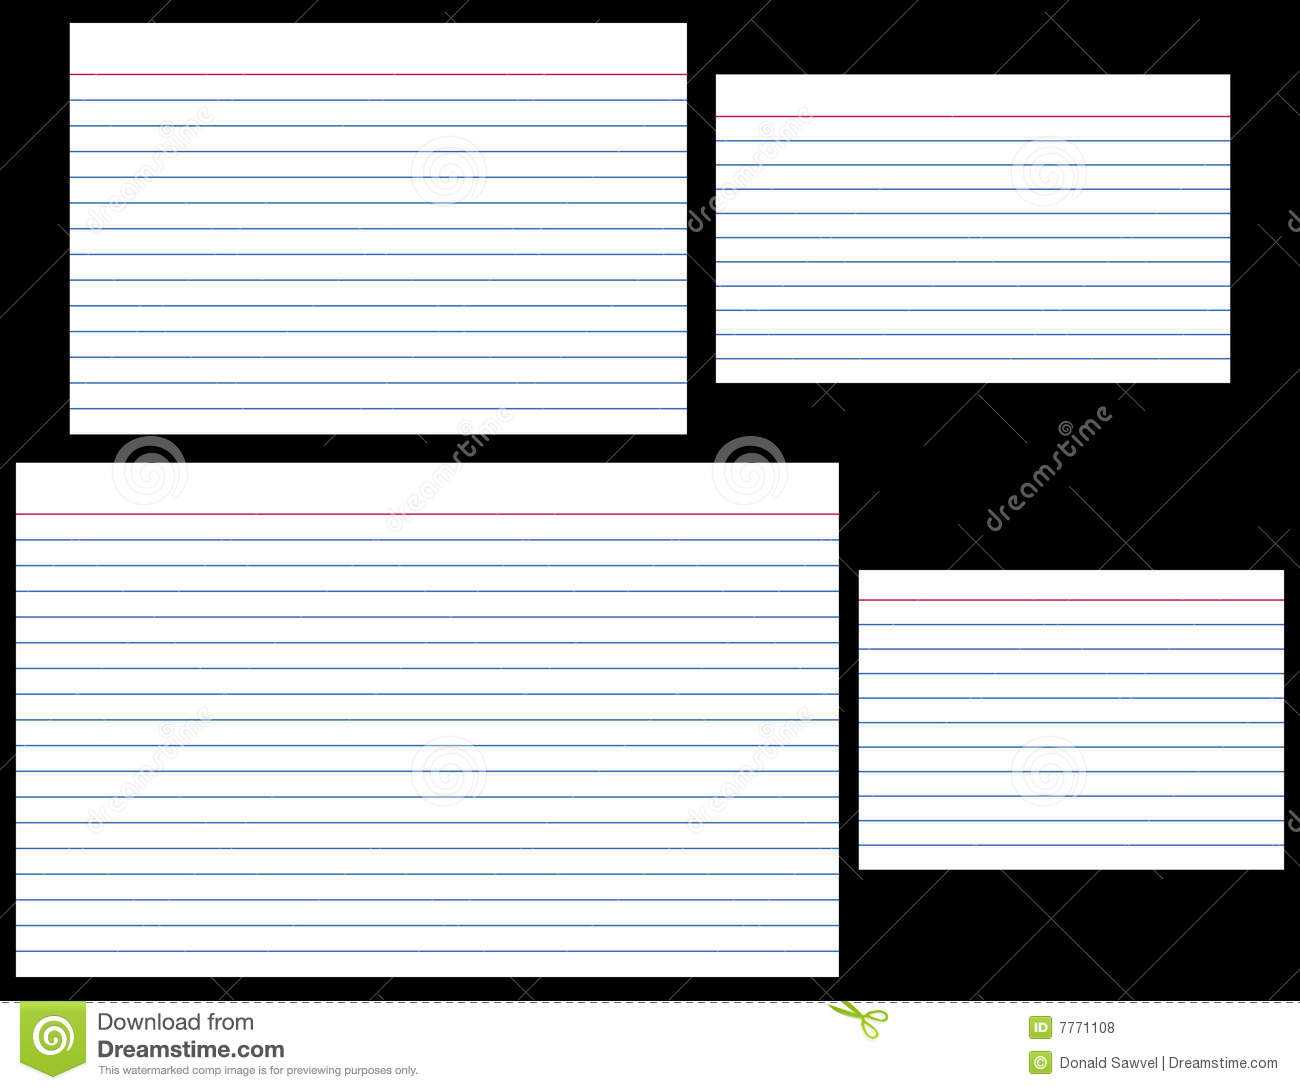 Index Cards Stock Vector. Illustration Of Card, Note, Blank Pertaining To Blank Index Card Template